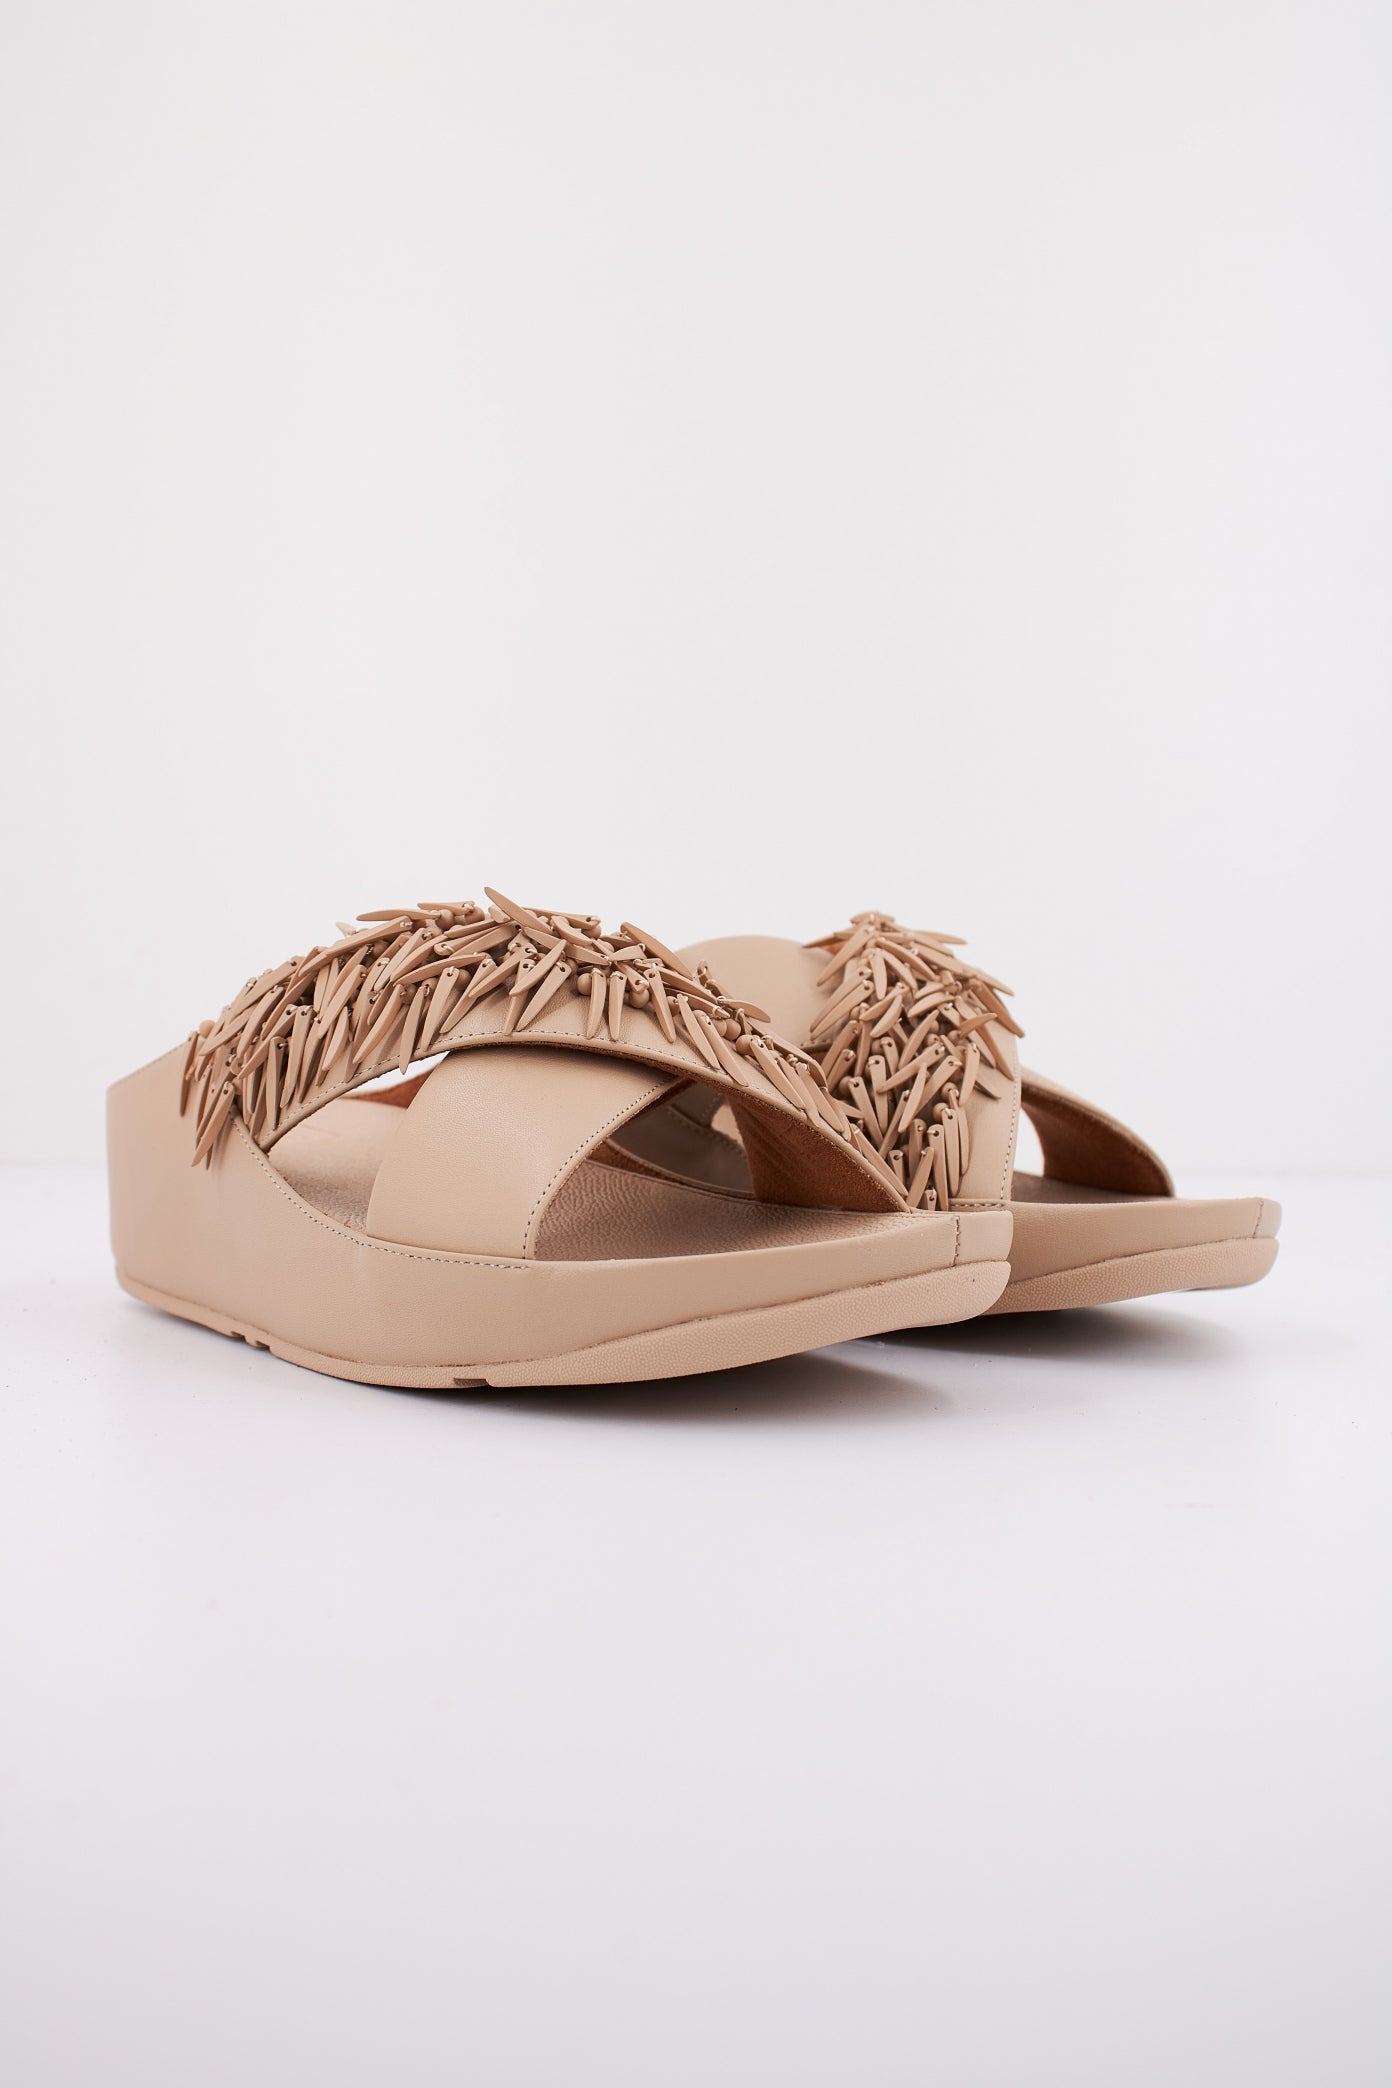 FITFLOP RUMBA BEADED LEATHER  en color BEIS  (2)